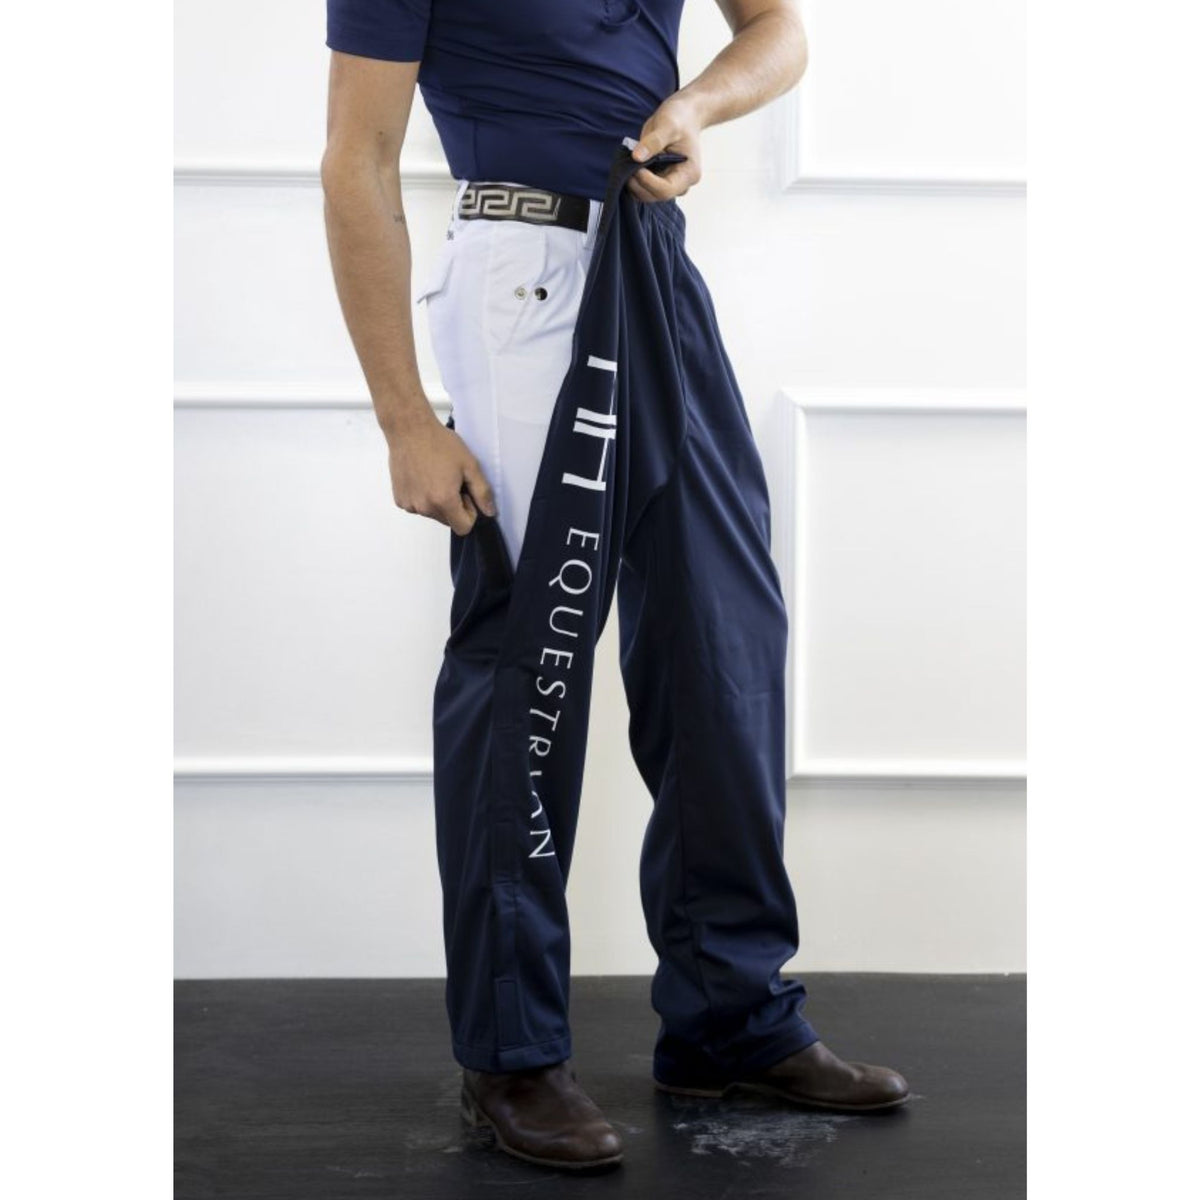 Navy over-pants with HH equestrian logo down the right pant